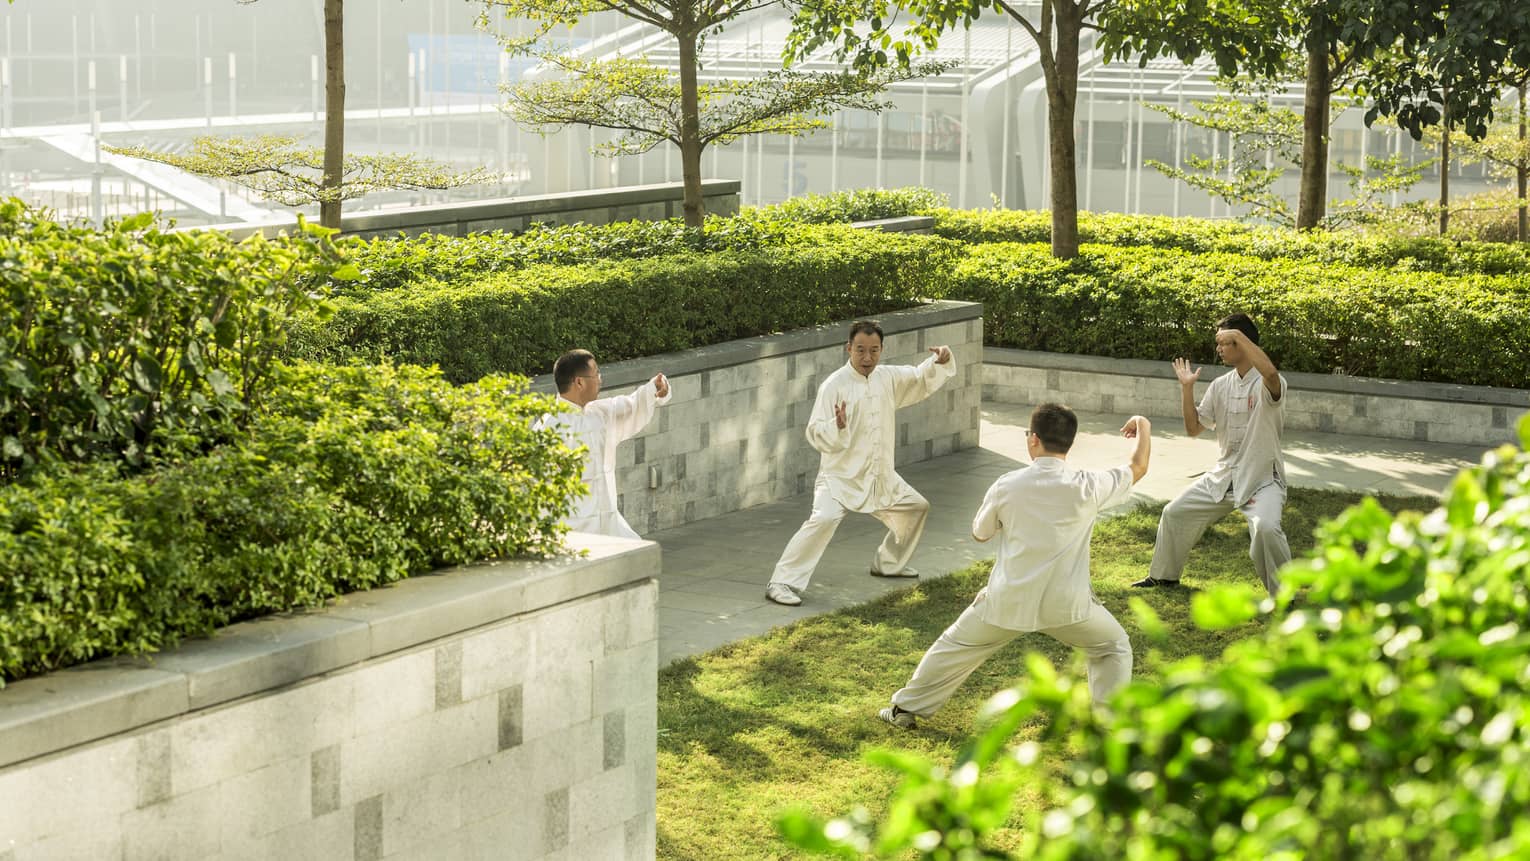 Mean wearing white practice tai-chi in sunny garden